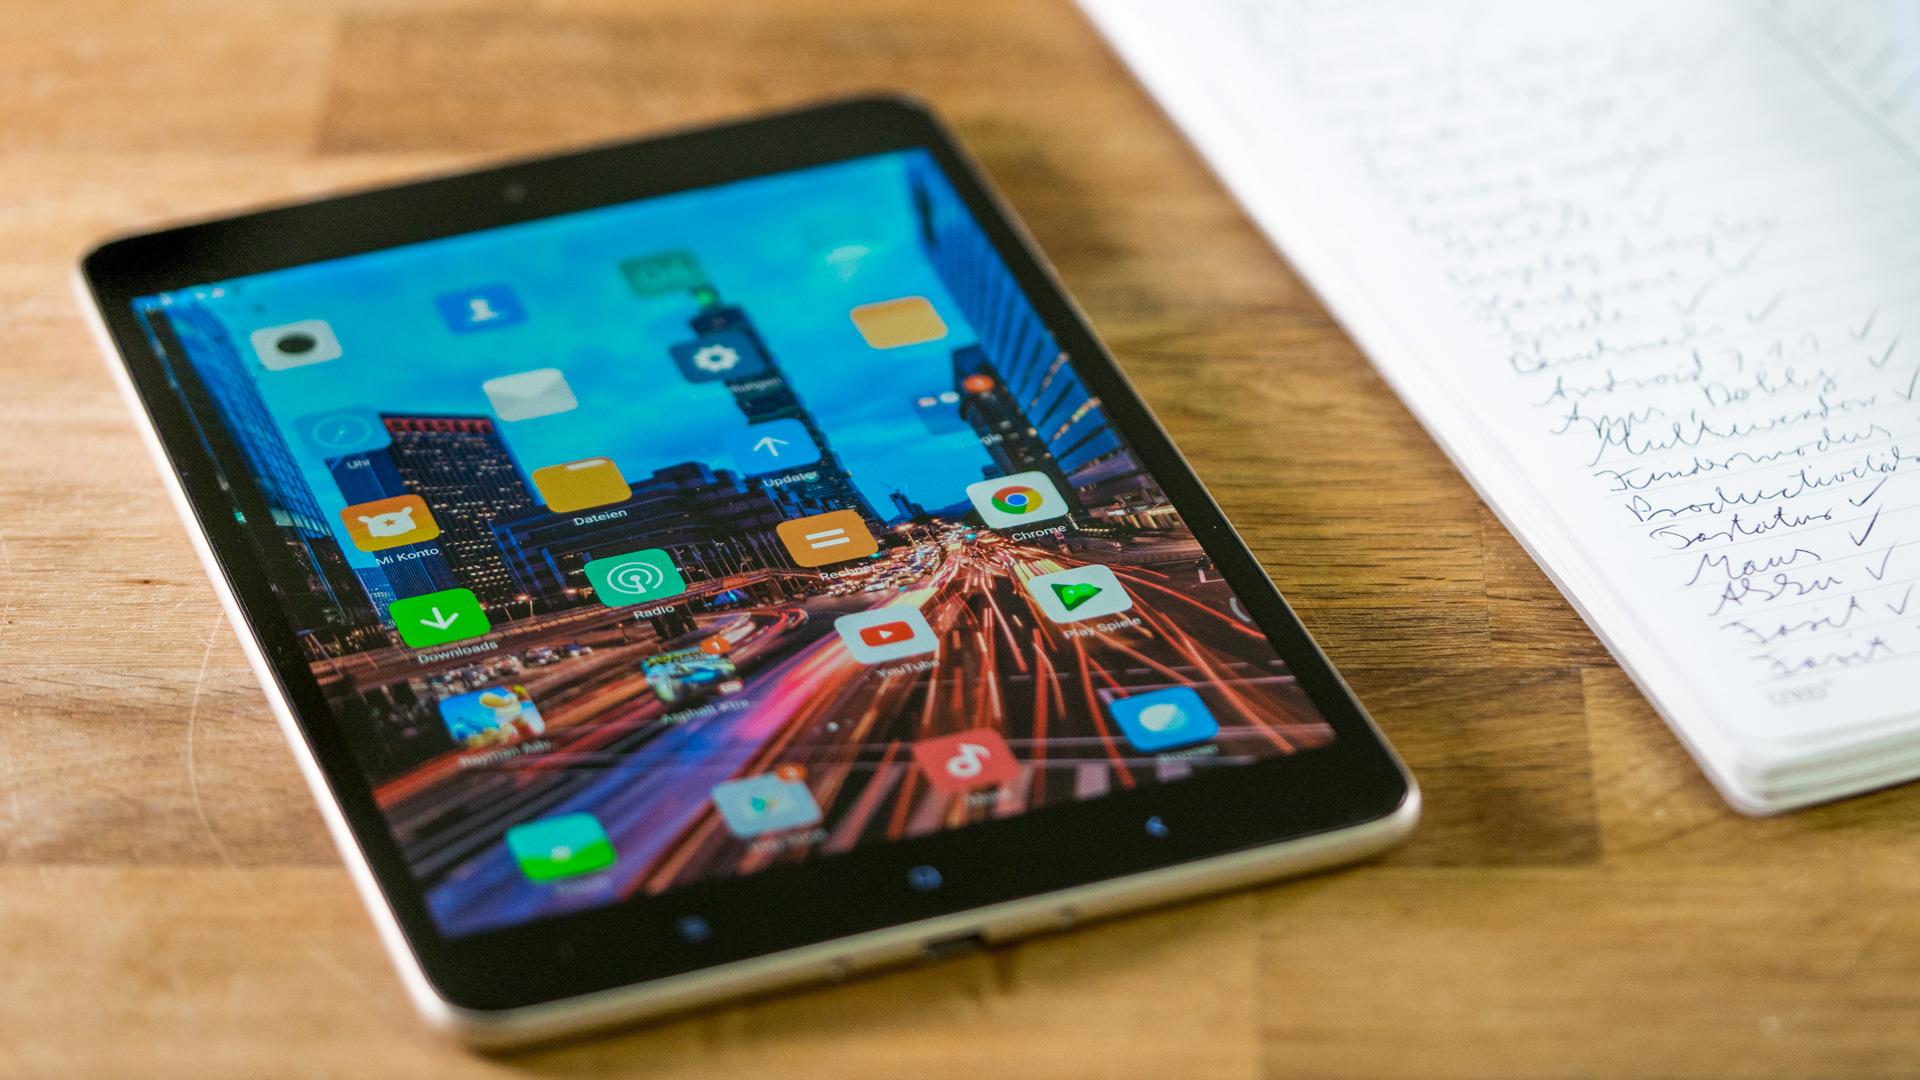 Xiaomi Mi Pad 3 - Android smartphone specifications, Price 